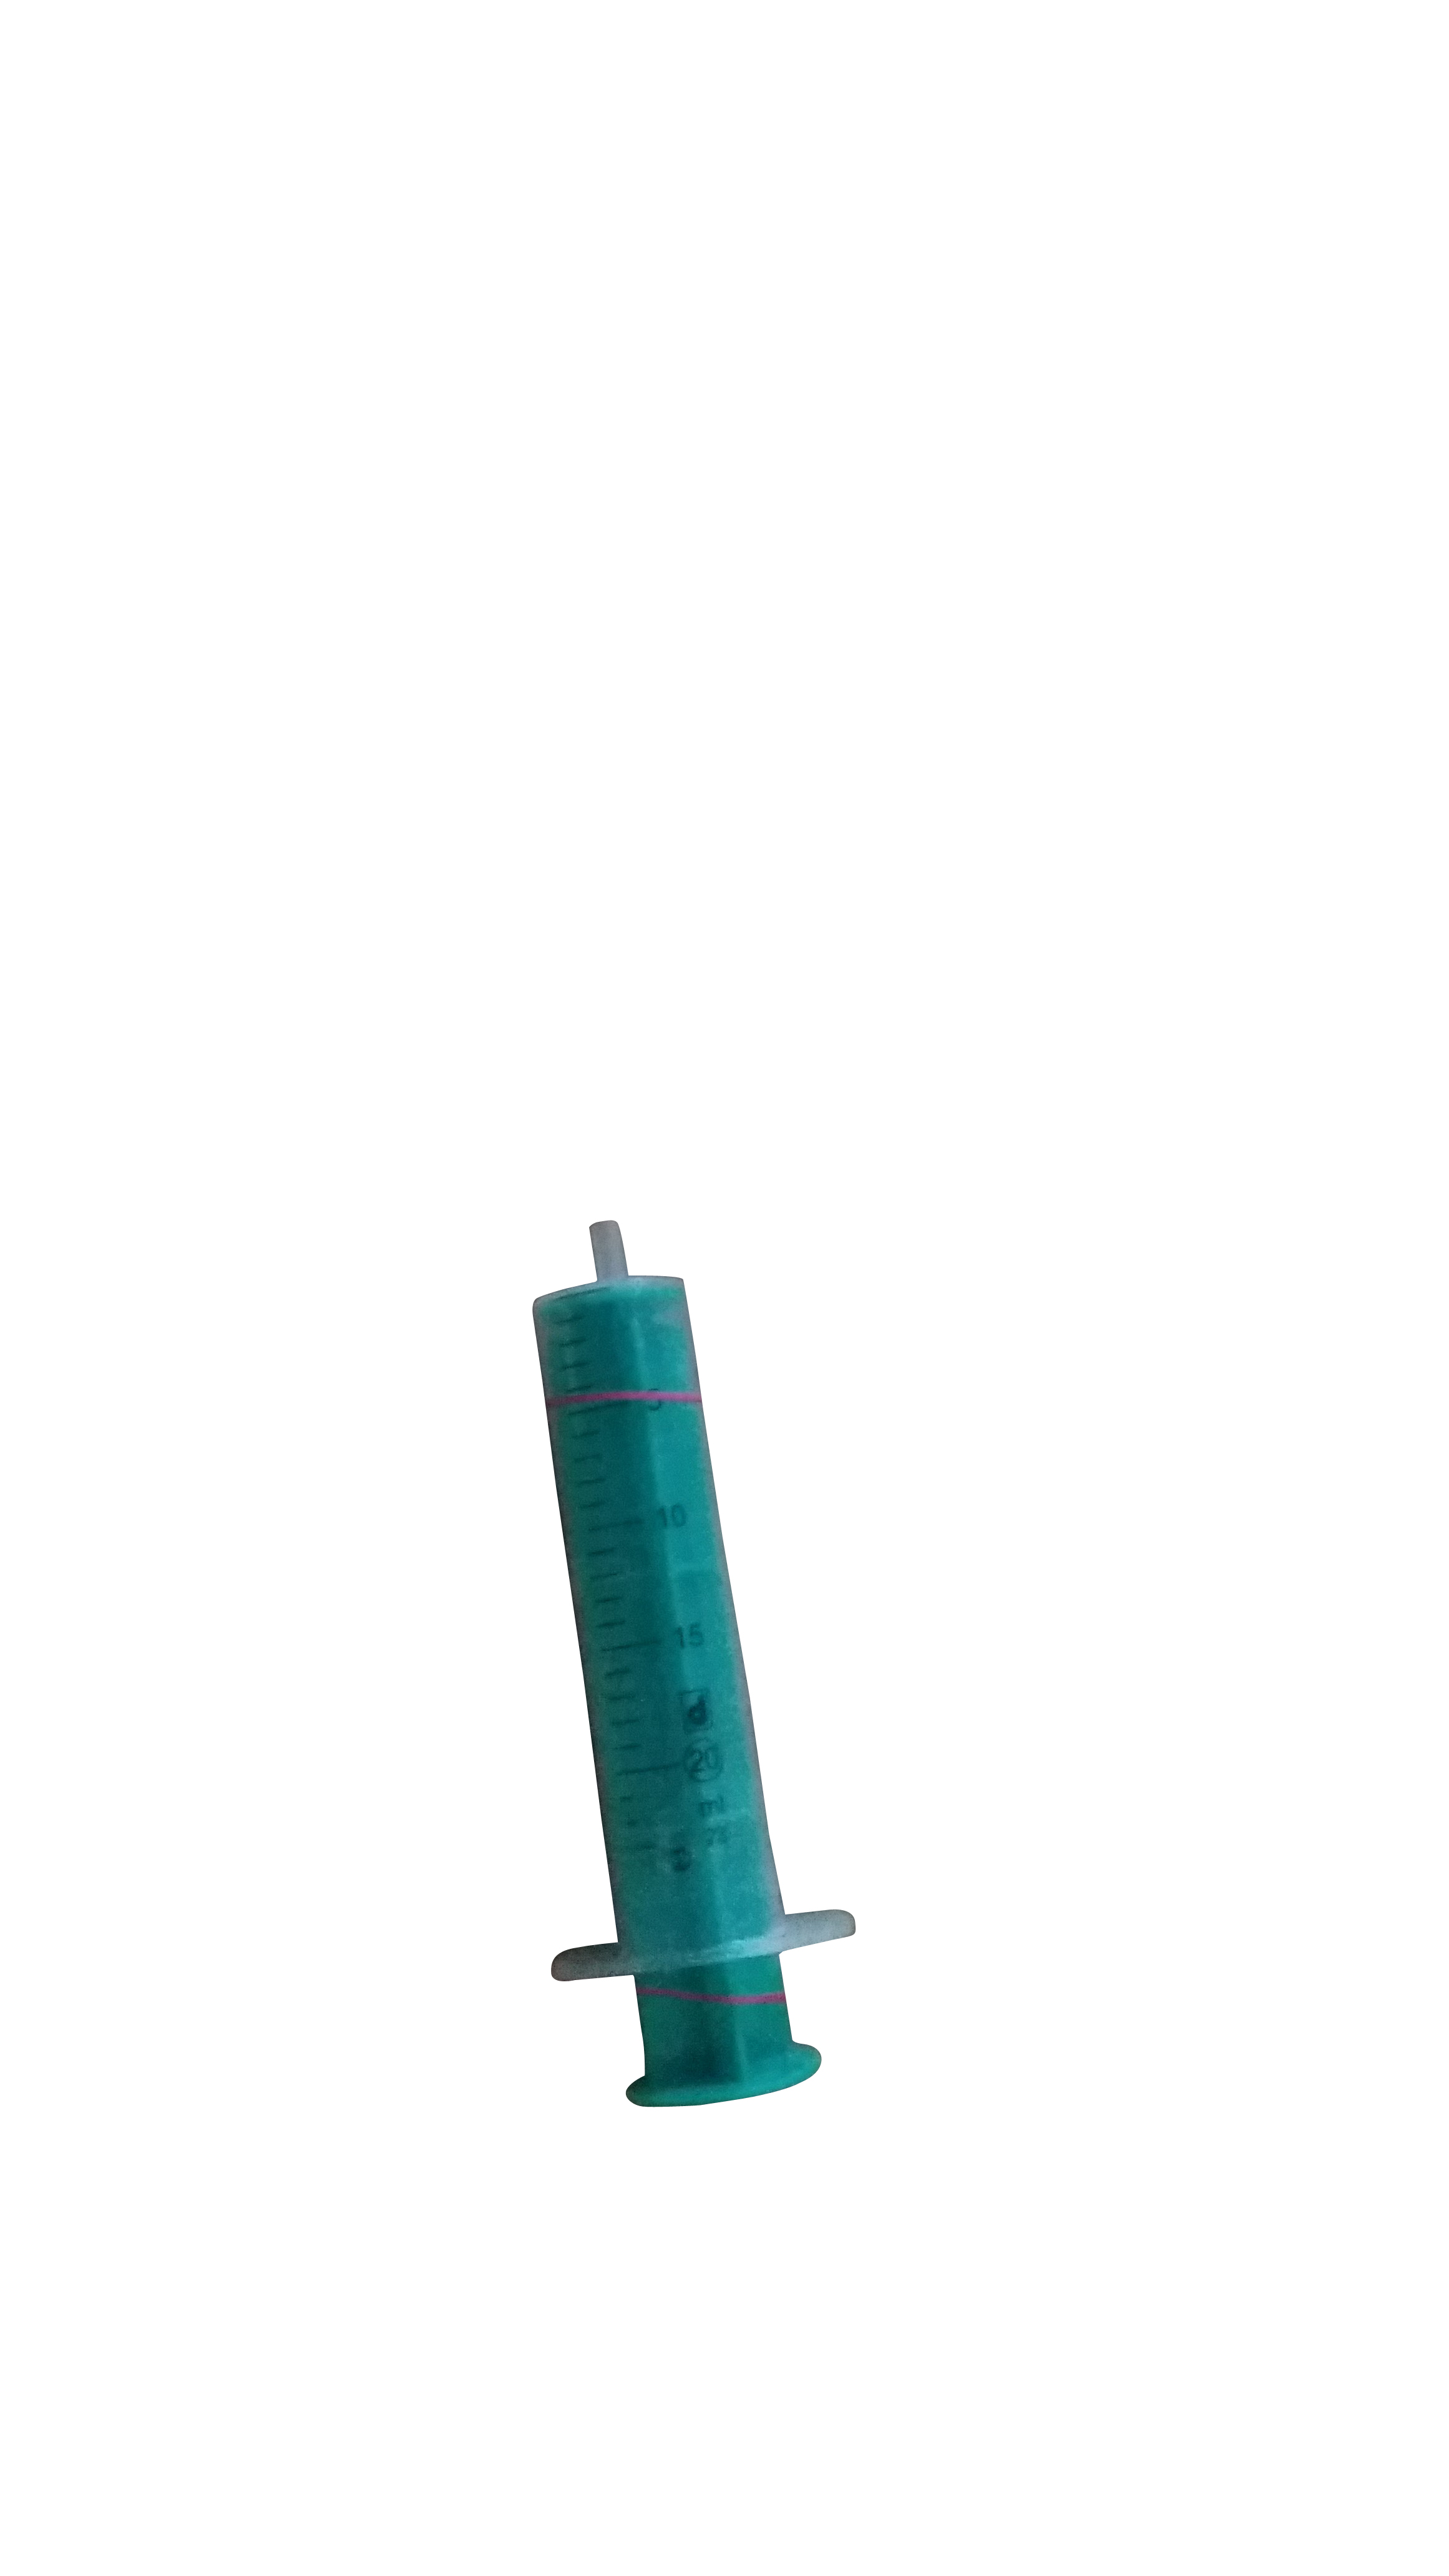 Air syringe for blowpipe